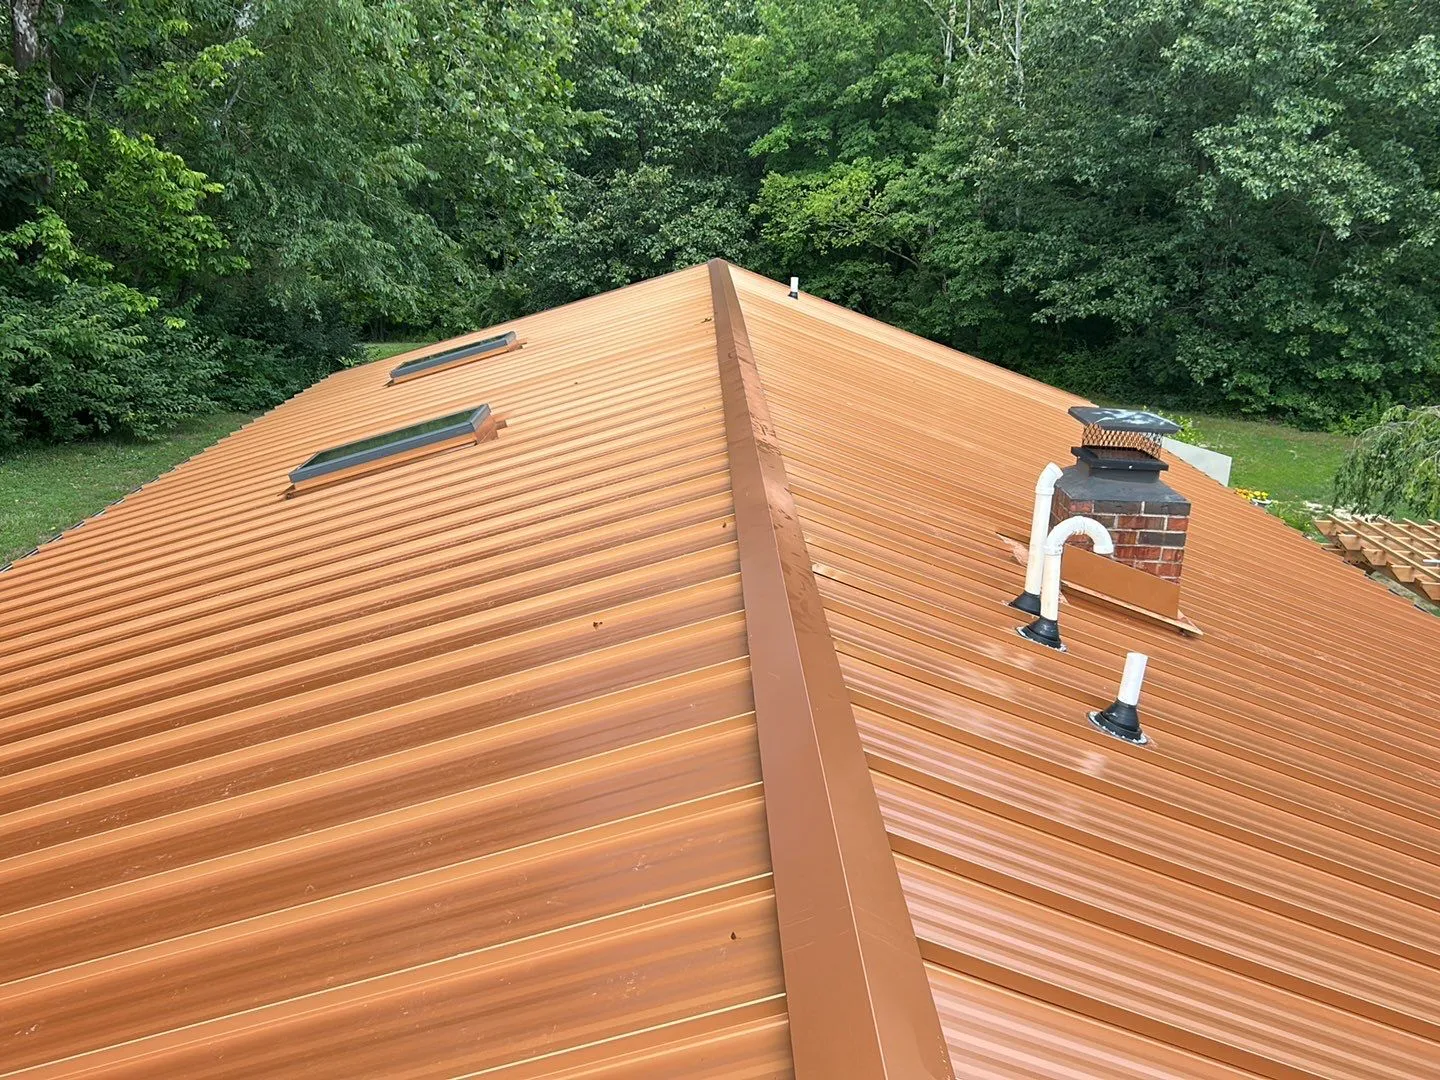 Copper-colored Standing Seam Metal roof installed on a residence in Effingham, IL.